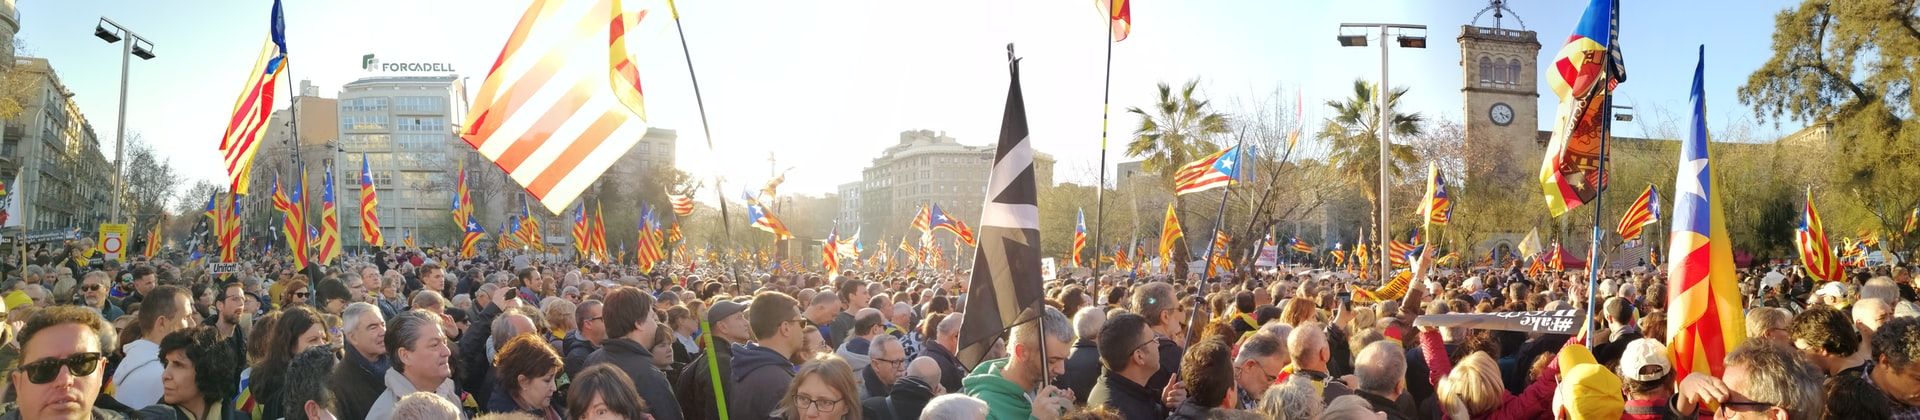 PUSH FOR FREEDOM: A pro-independence rally in Barcelona